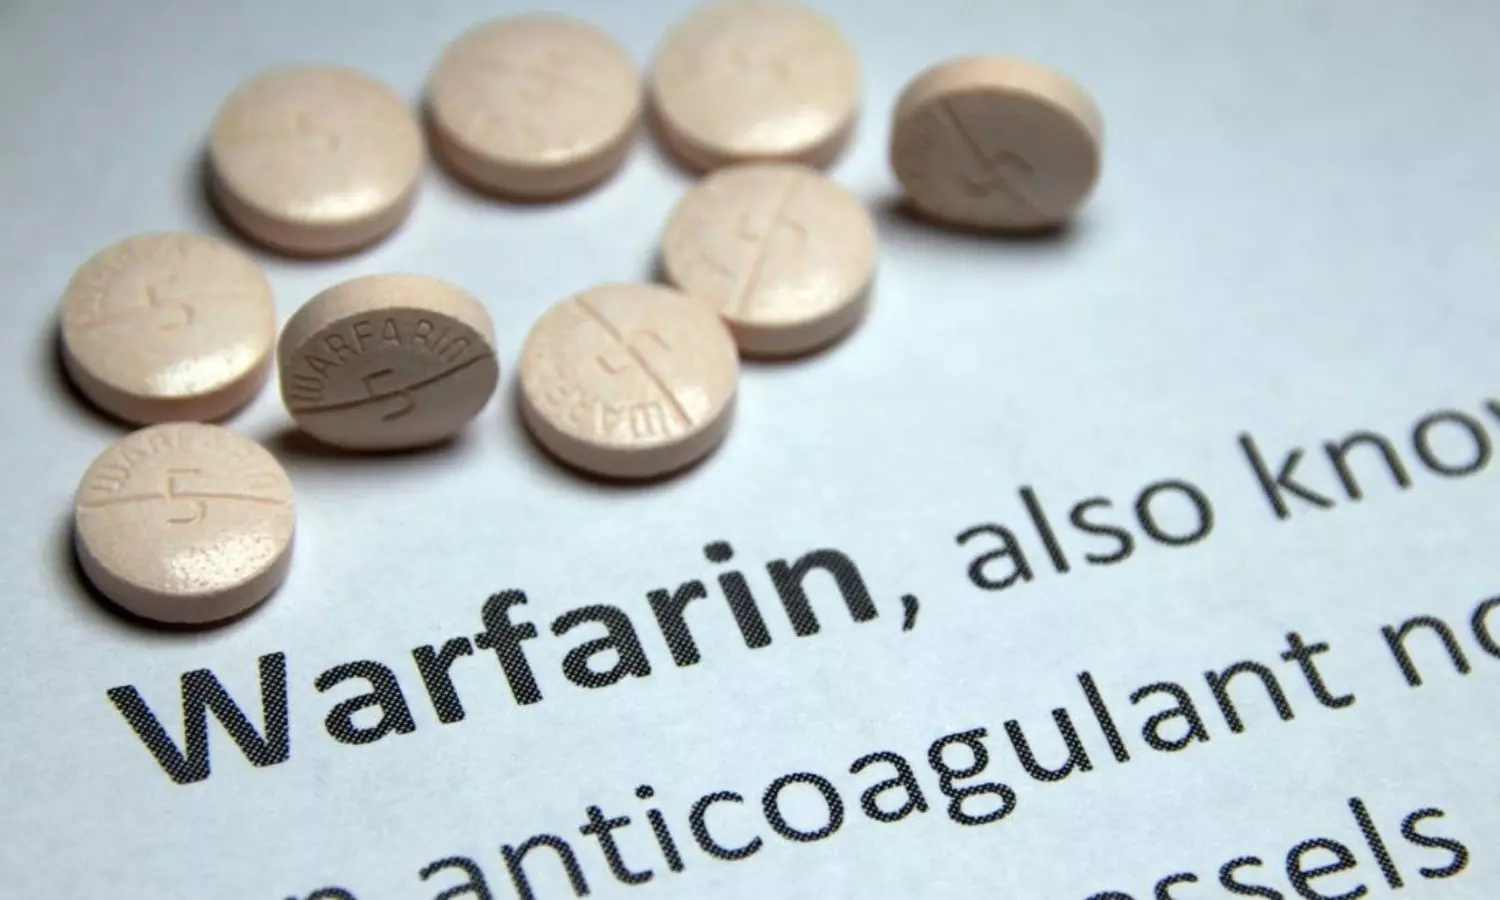 Warfarin use in cancer-associated thrombosis tied to improved overall survival: Study